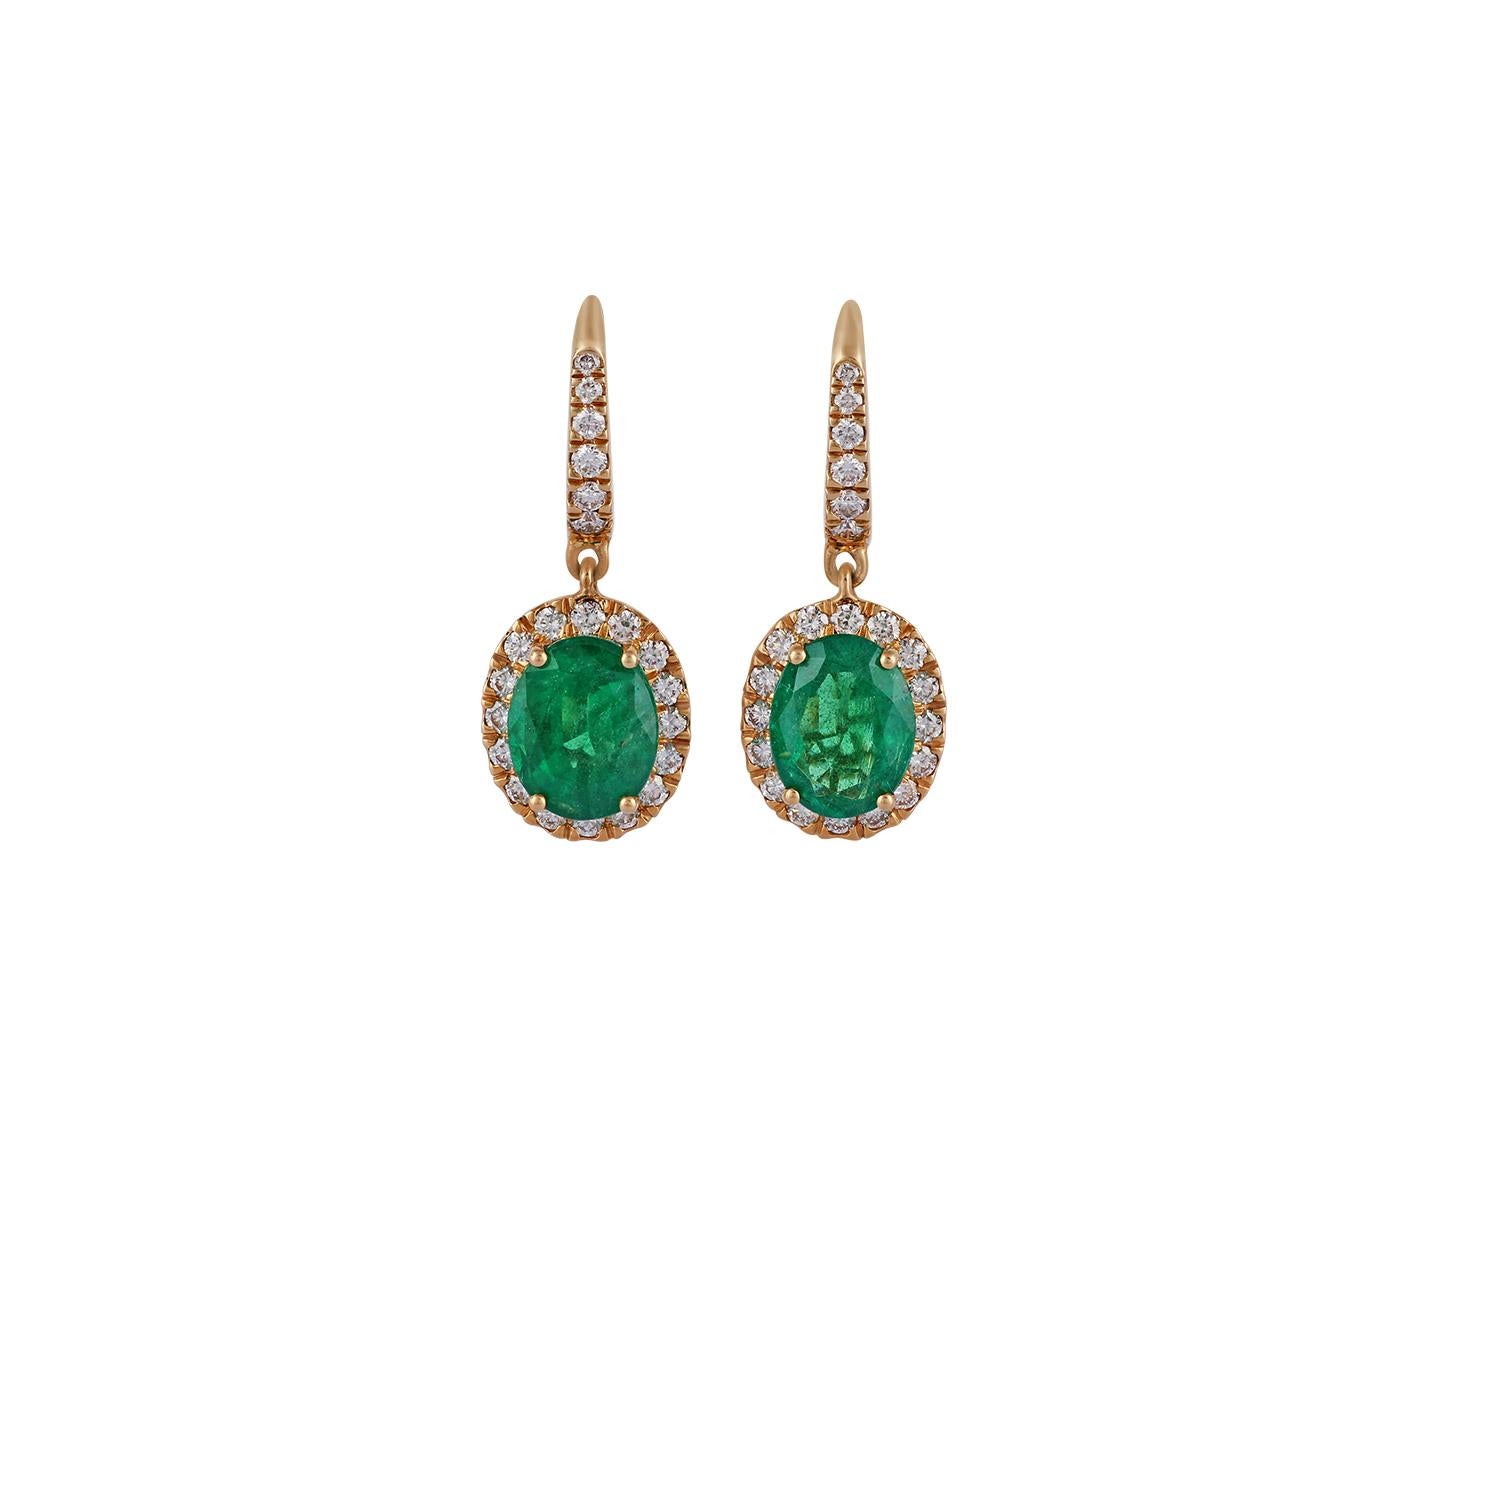 Oval Shaped Emerald - 5.15 Cts.
Round Shaped Diamond - 0.91 Cts.
18K Yellow Gold - 6.43 Grams